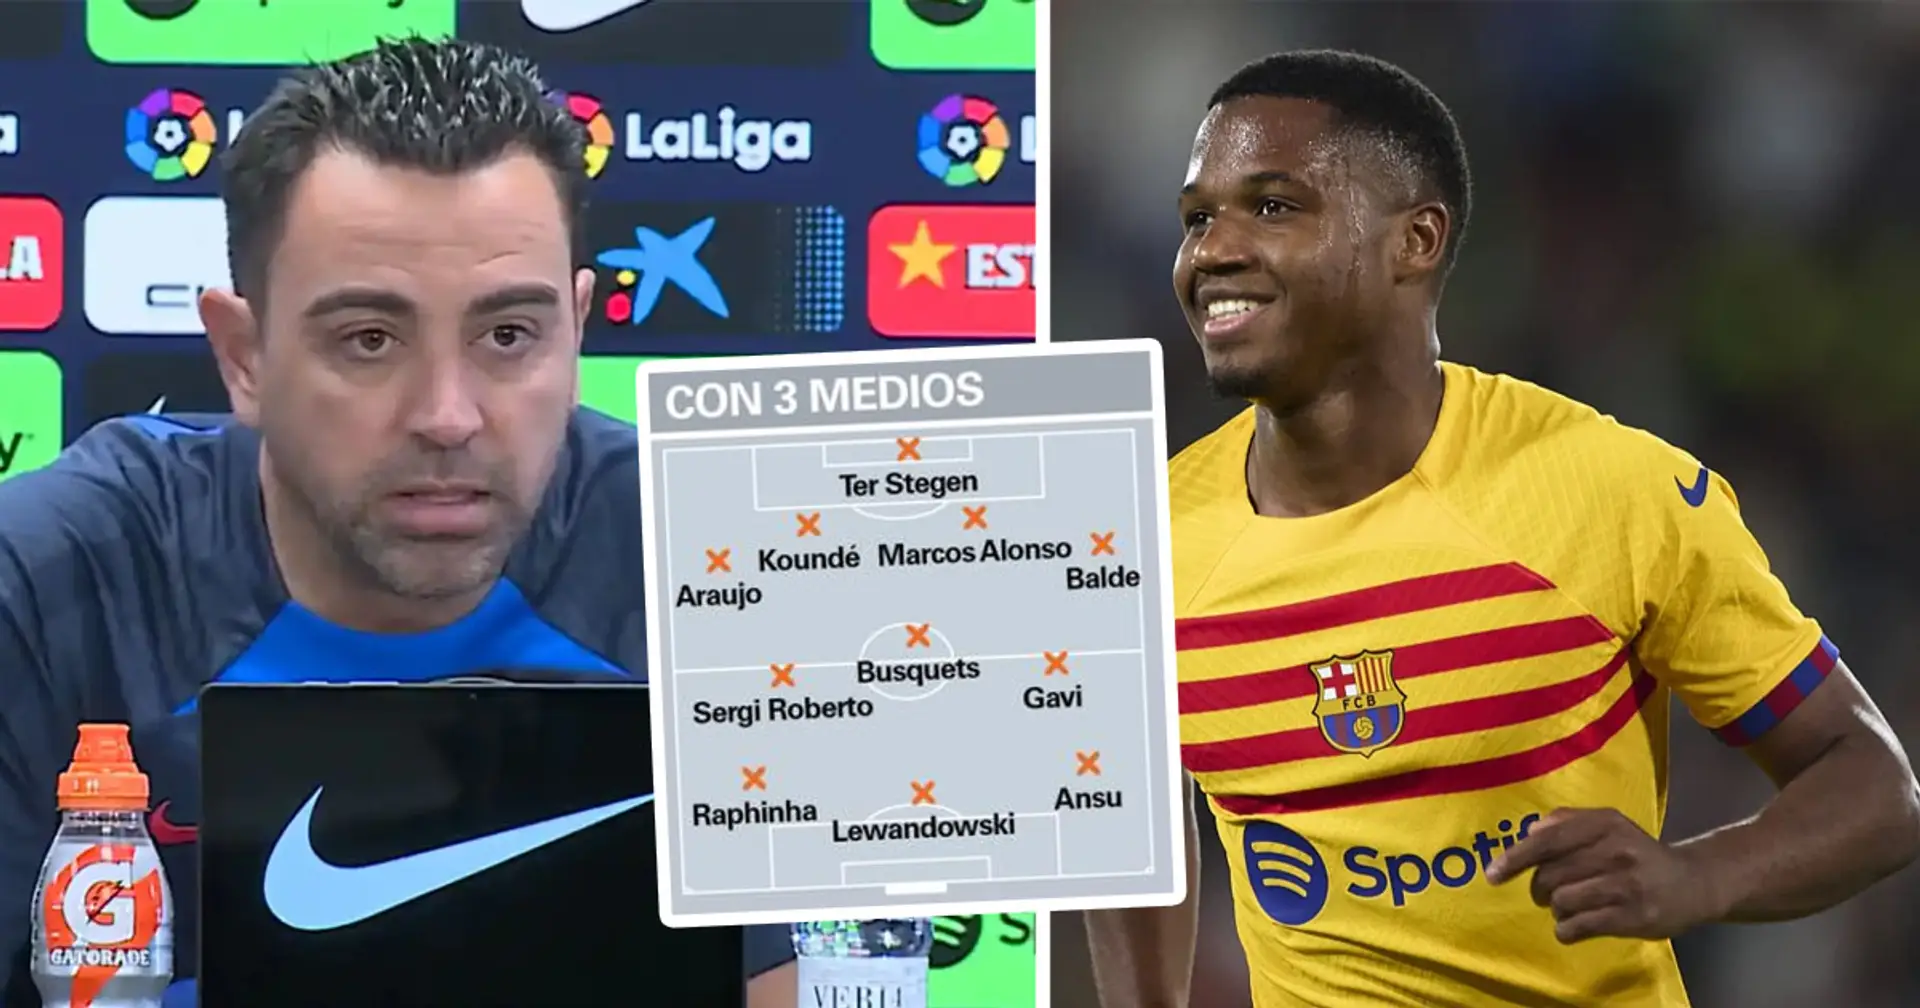 Ansu Fati could start: Xavi's doubt ahead of El Clasico shown in 2 lineups